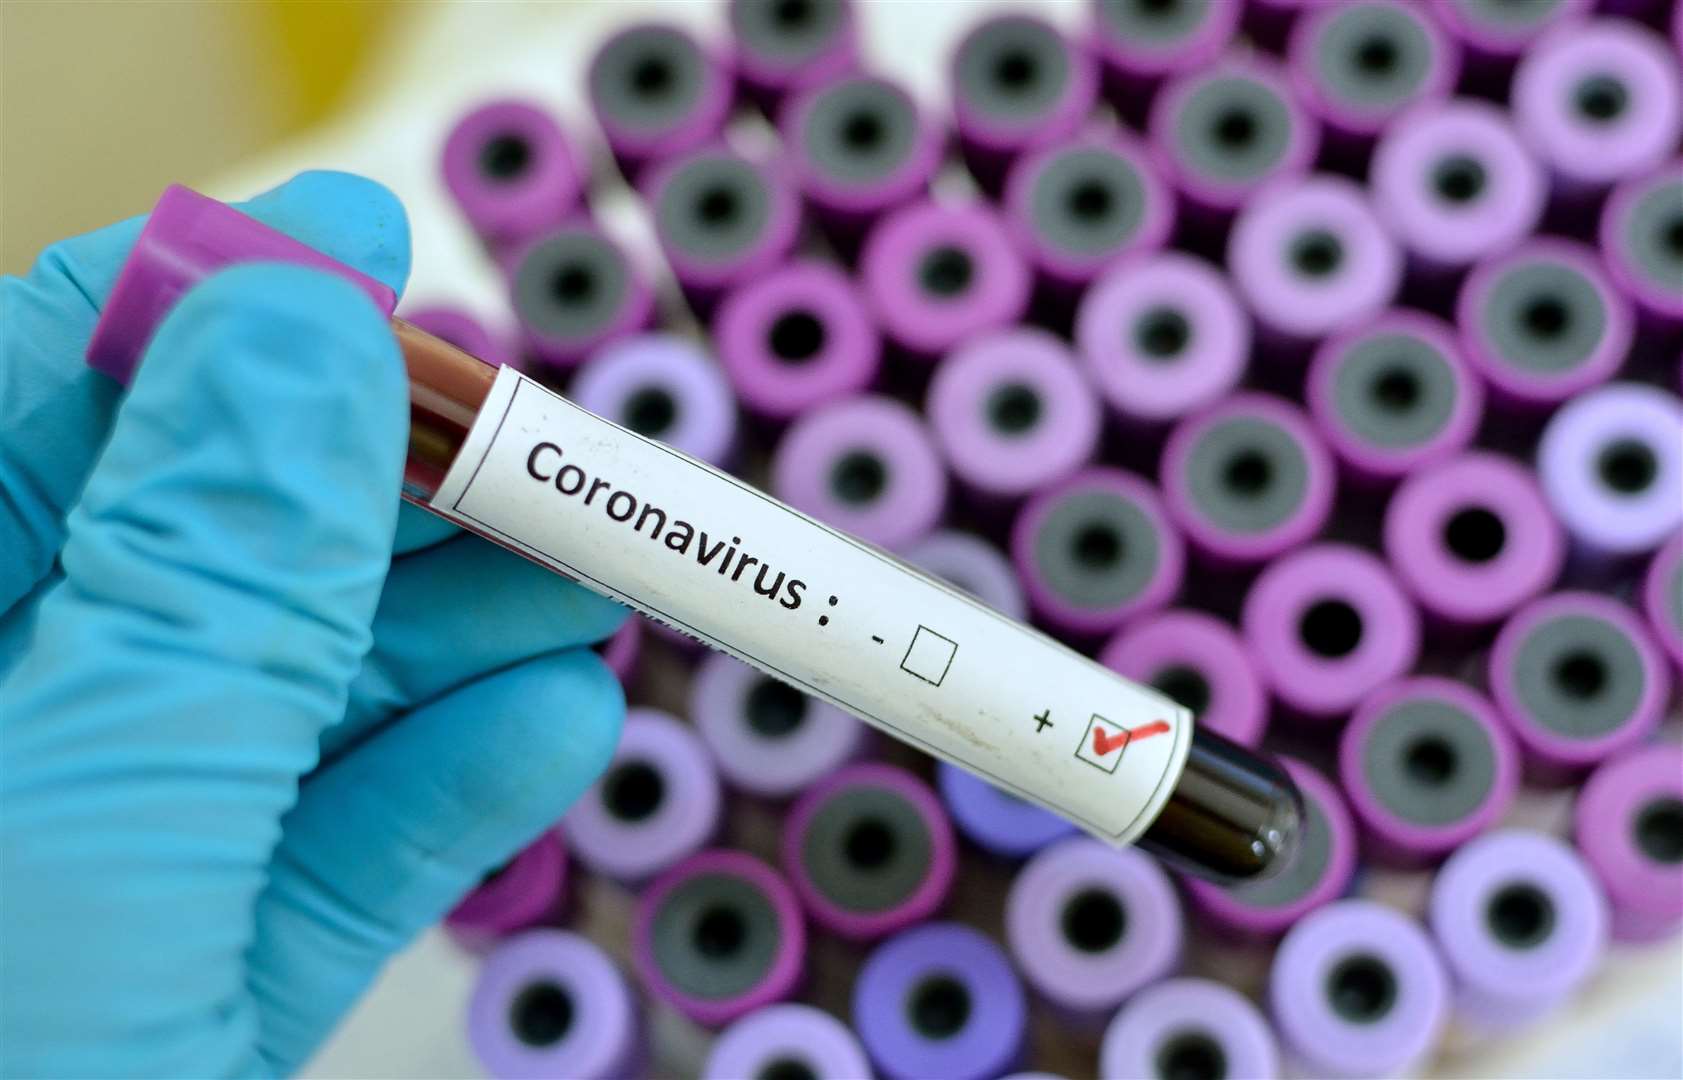 The coronavirus has hit Singapore where 90 cases have been confirmed